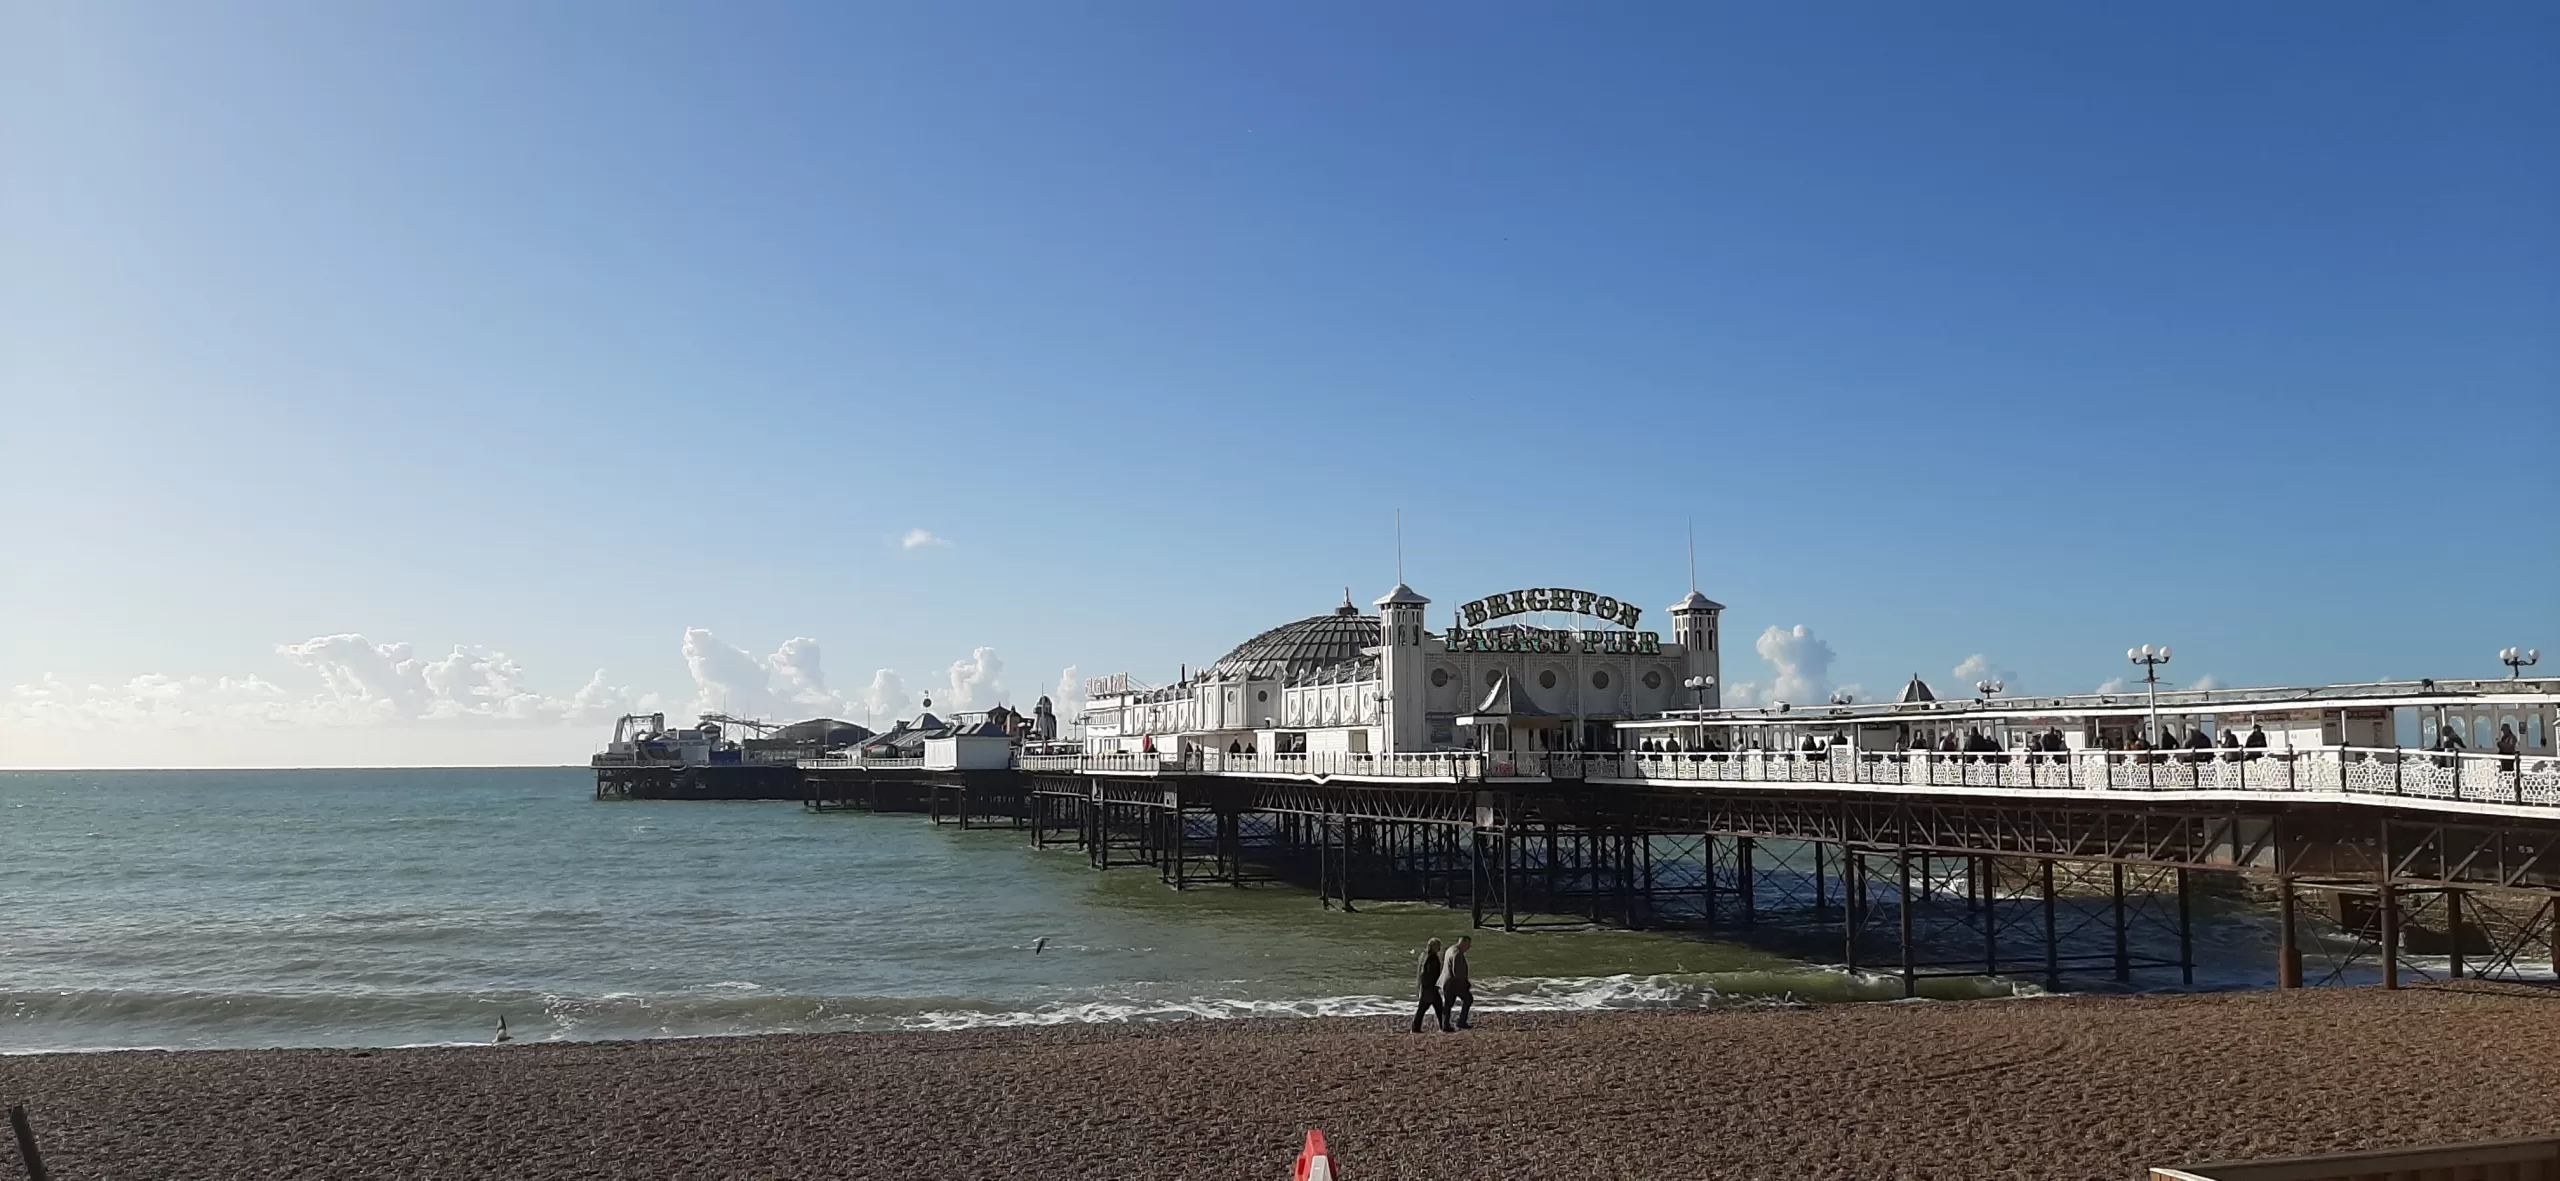 What are the pros and cons of visiting Brighton? Best Tips and Things to Do in the Seaside Resort.